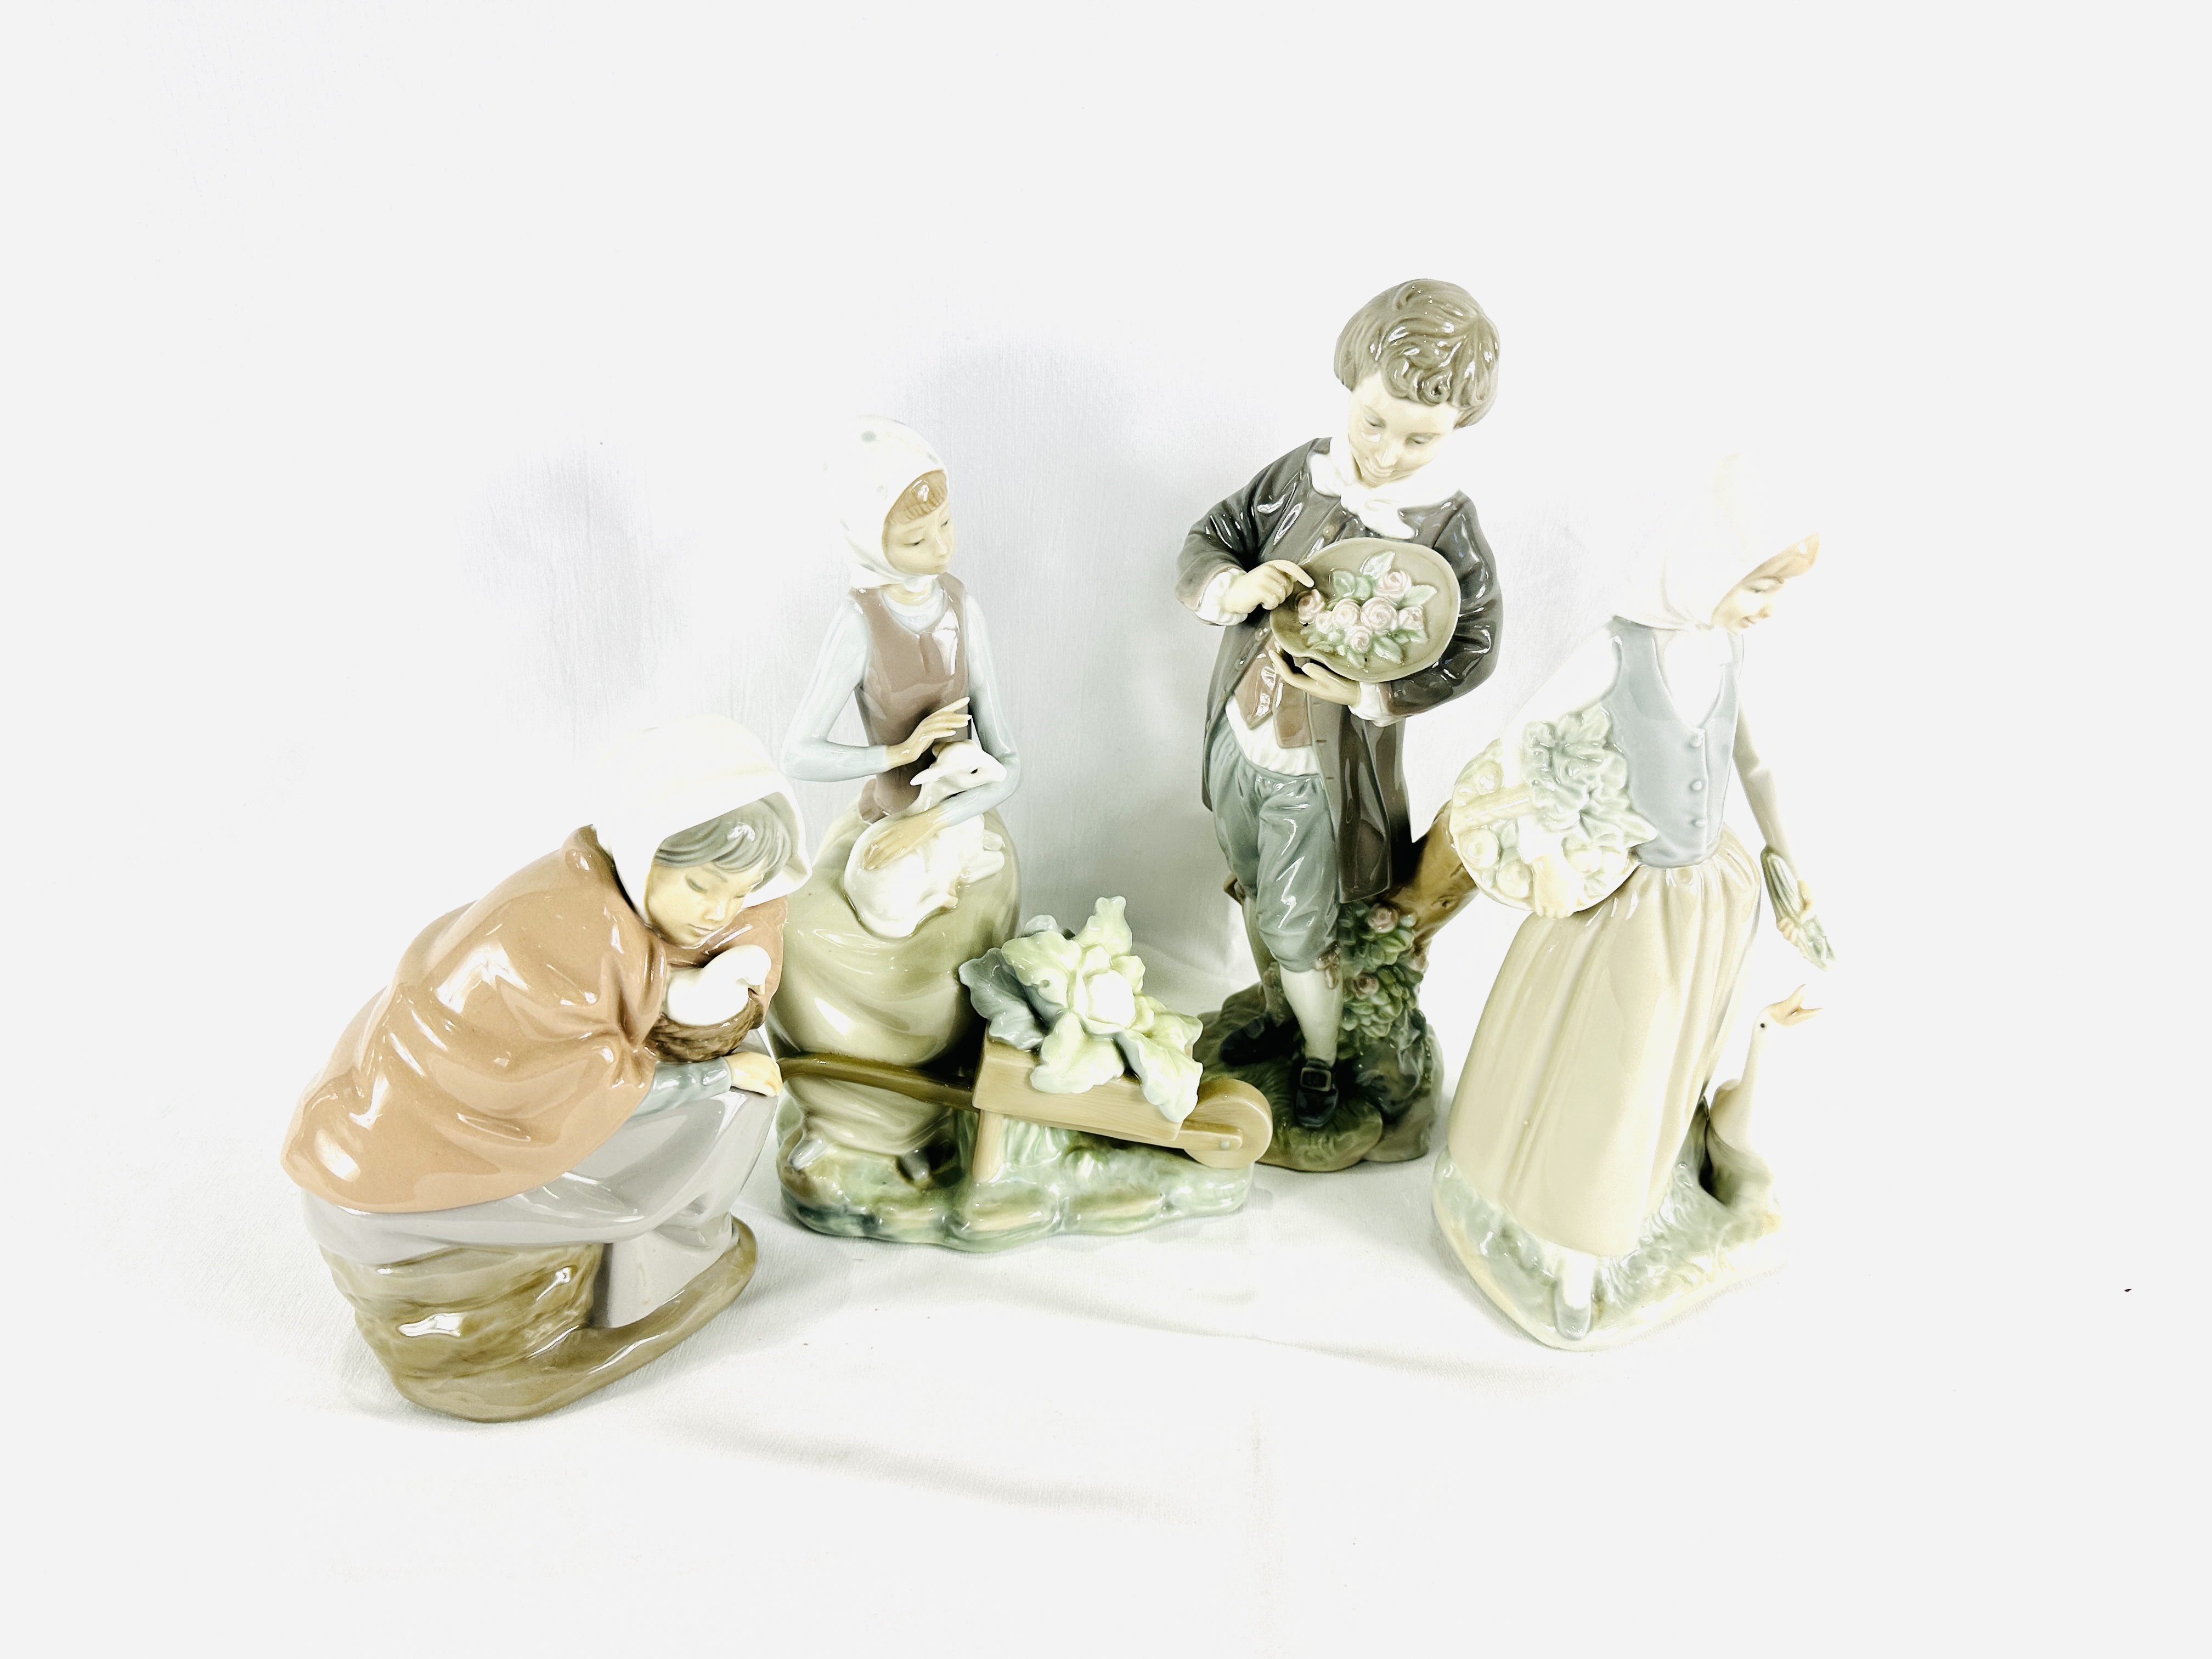 Two Lladro figures and two Neo figures